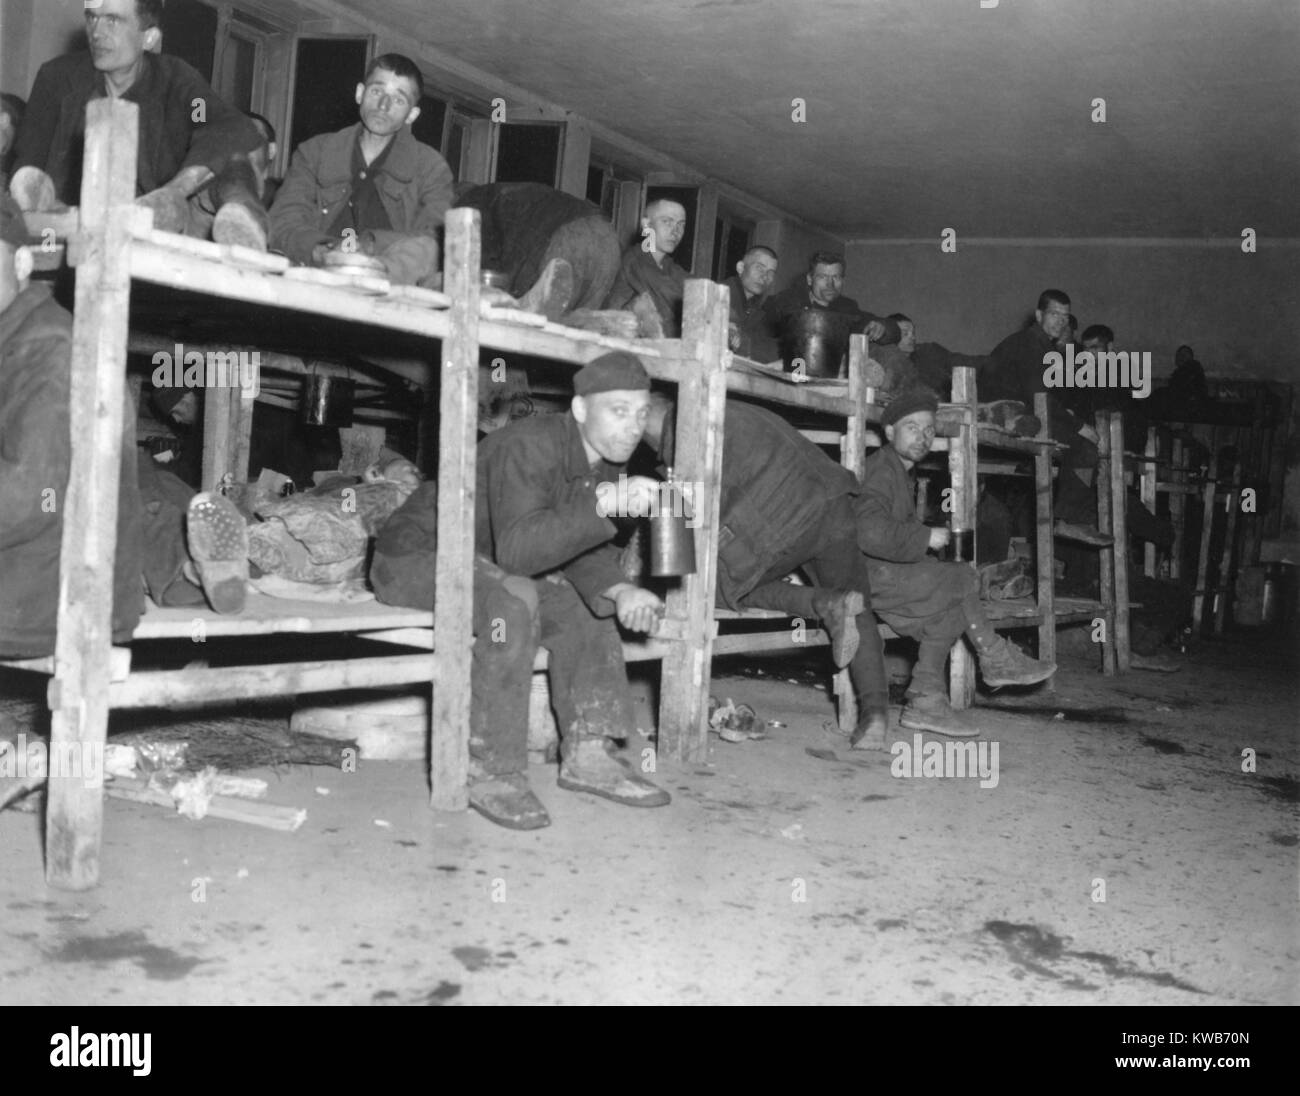 Allied prisoners in the 'Hospital' of a Nazi POW camp captured by the 9th U.S. Army. Over 22,000 prisoners from 11 nations were housed here, some for over five years. The 19,000 Russian prisoners were systematically fed half the rations of the other prisoners. Hemer, Germany, April 14, 1945. World War 2. (BSLOC 2014 8 94) Stock Photo